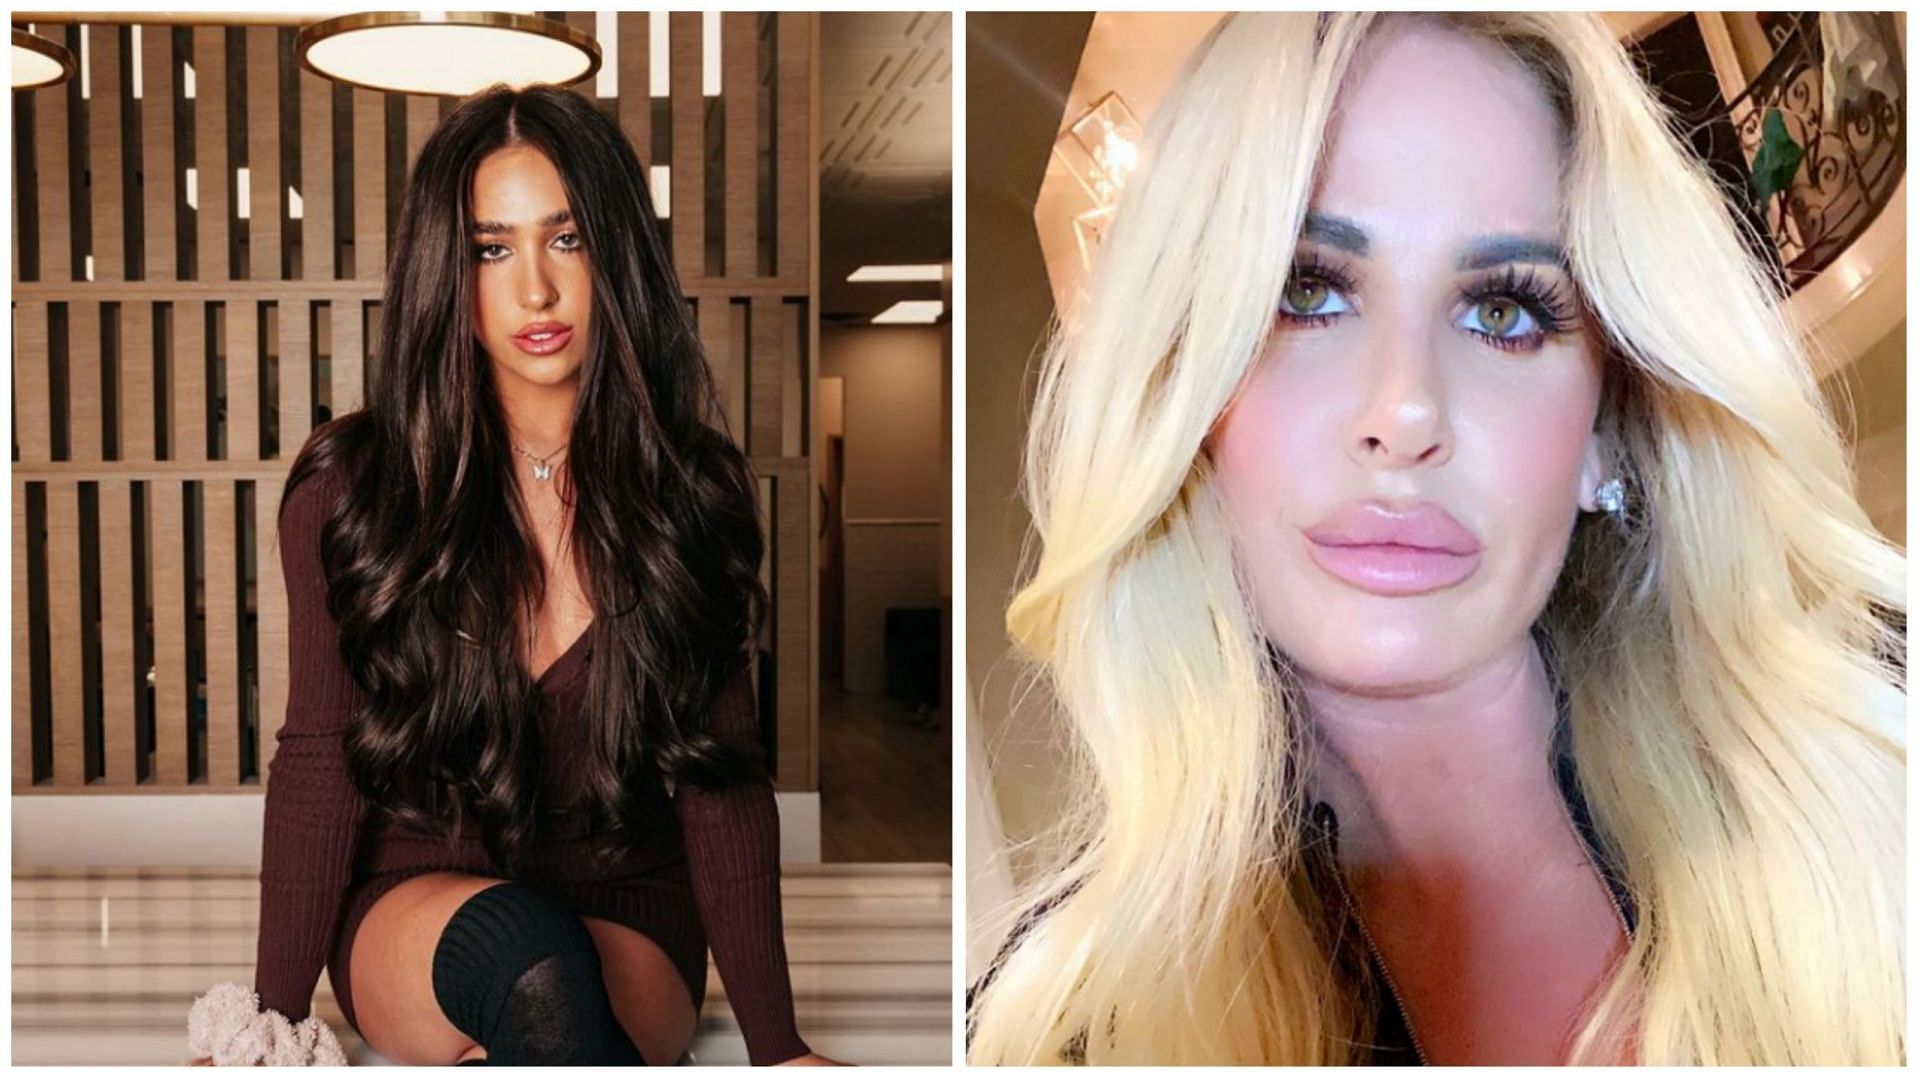 Kim Zolciak&rsquo;s daughter Ariana Biermann got arrested for driving under influence (Image via @arianabiermann and @kimzolciakbiermann/Instagram)